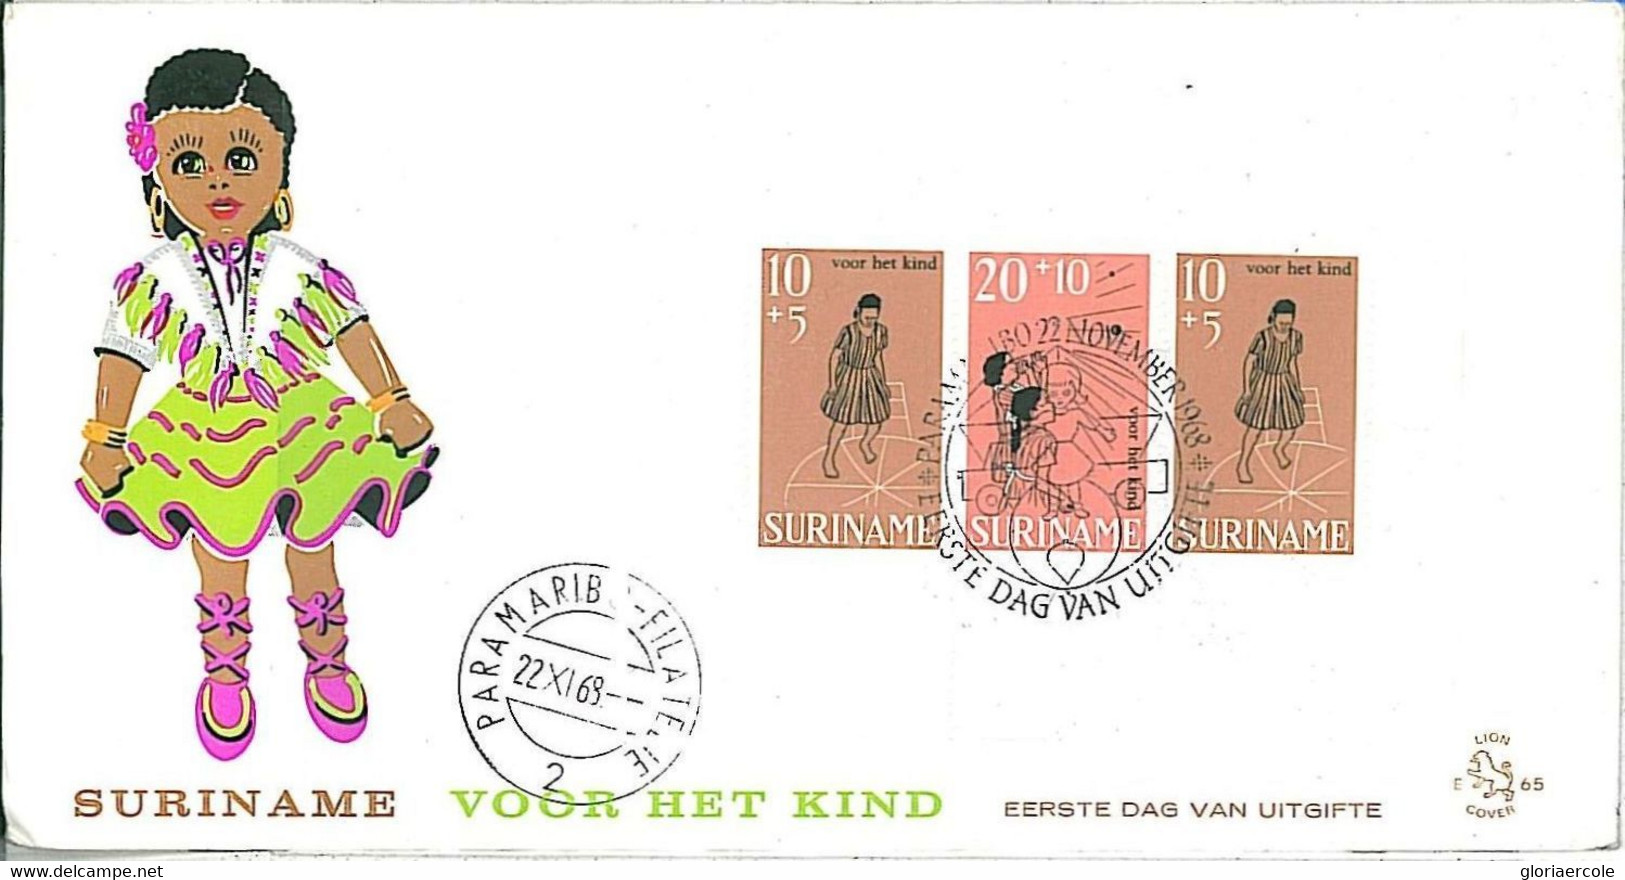 25498 - SURINAME - POSTAL HISTORY - FDC COVER 1969 : CHILDREN / TOYS / DOLLS - Puppen